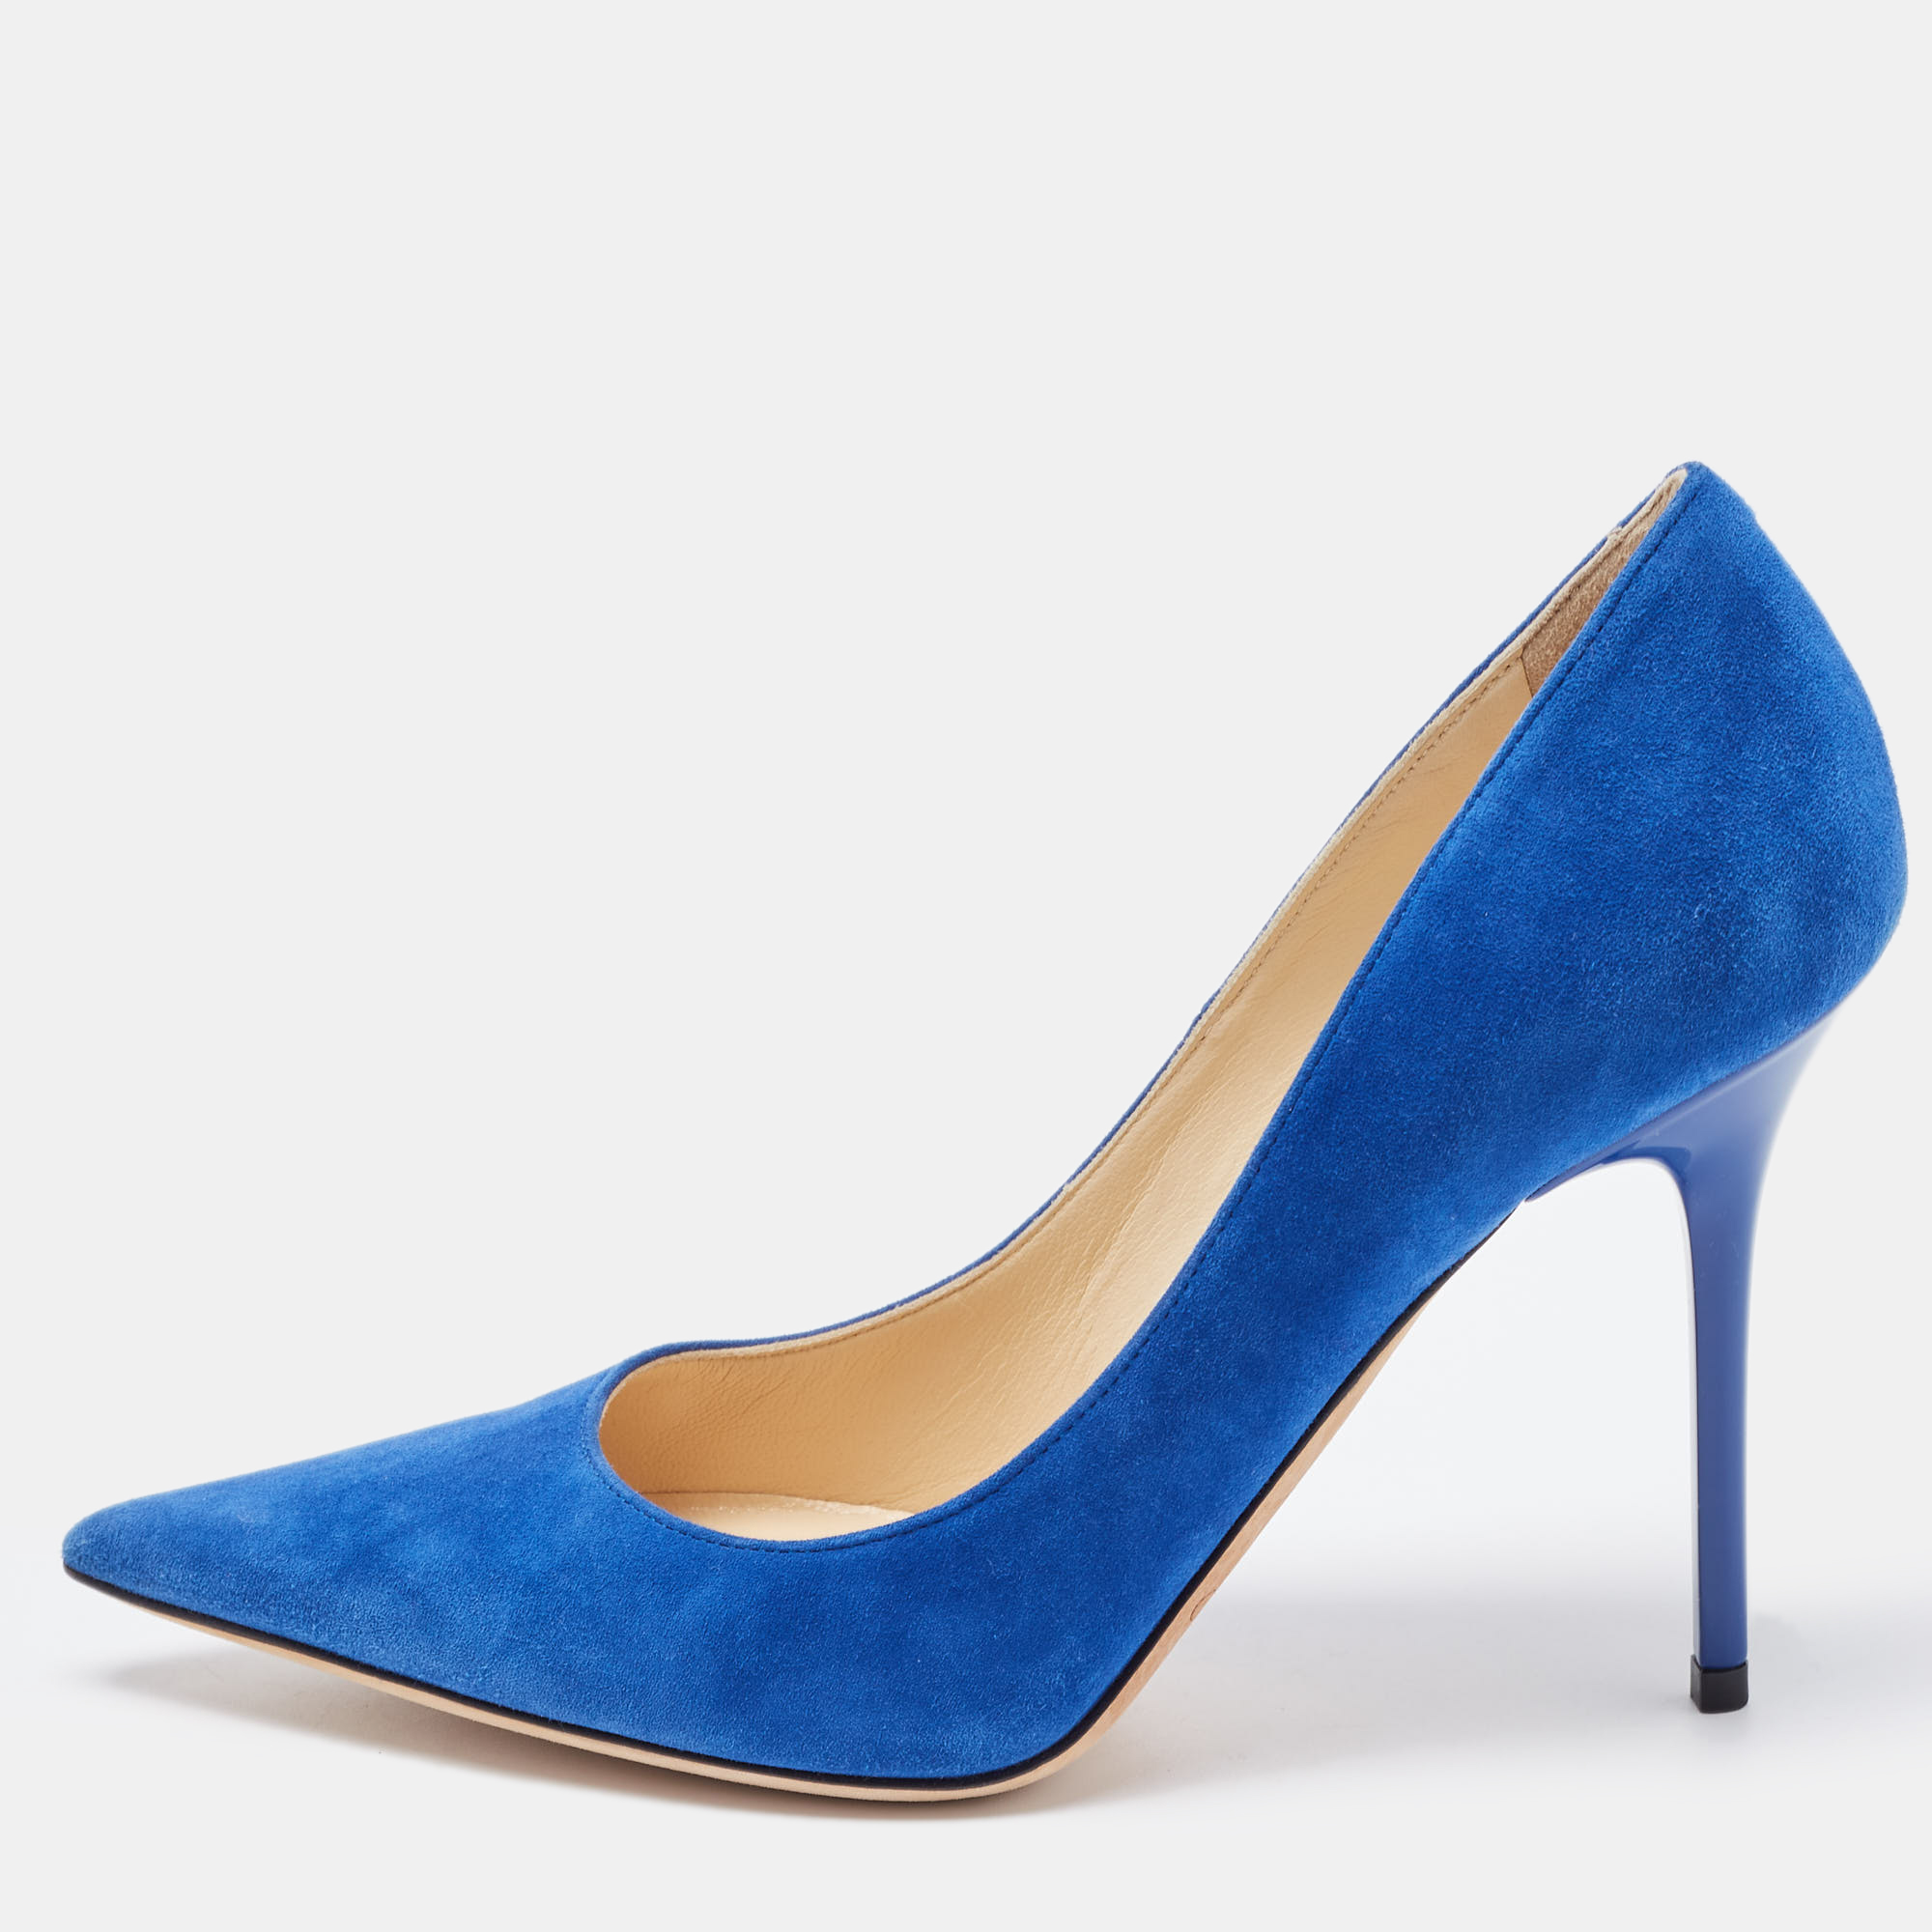 Pre-owned Jimmy Choo Blue Suede Romy Pumps Size 36